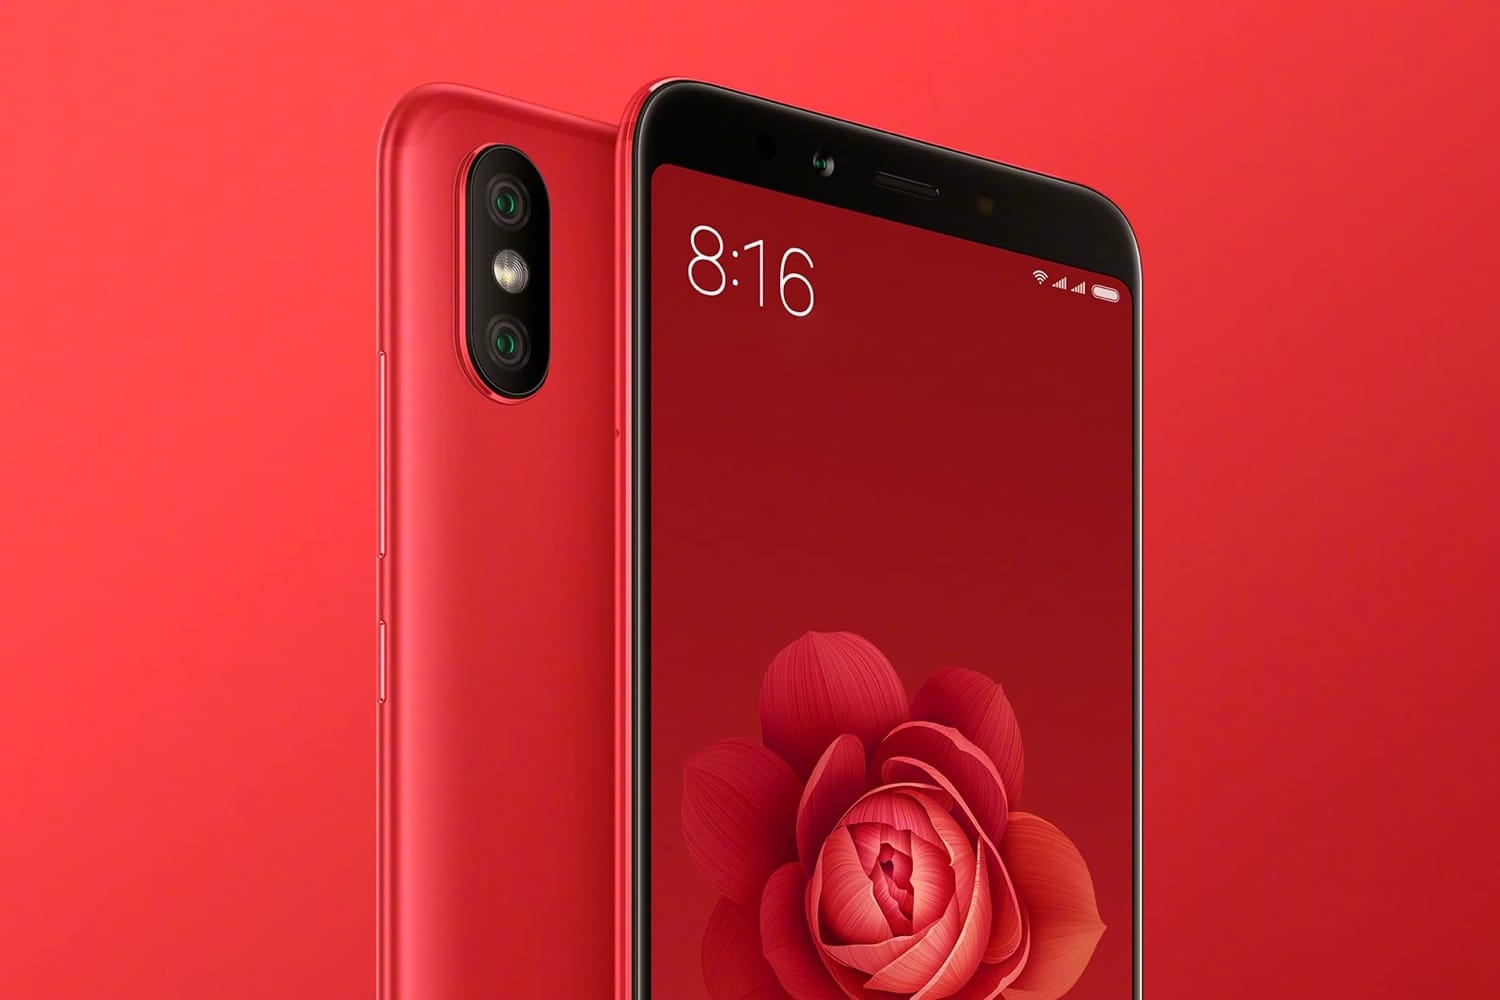 New Official Poster Focuses On The Rear of The Redmi S2